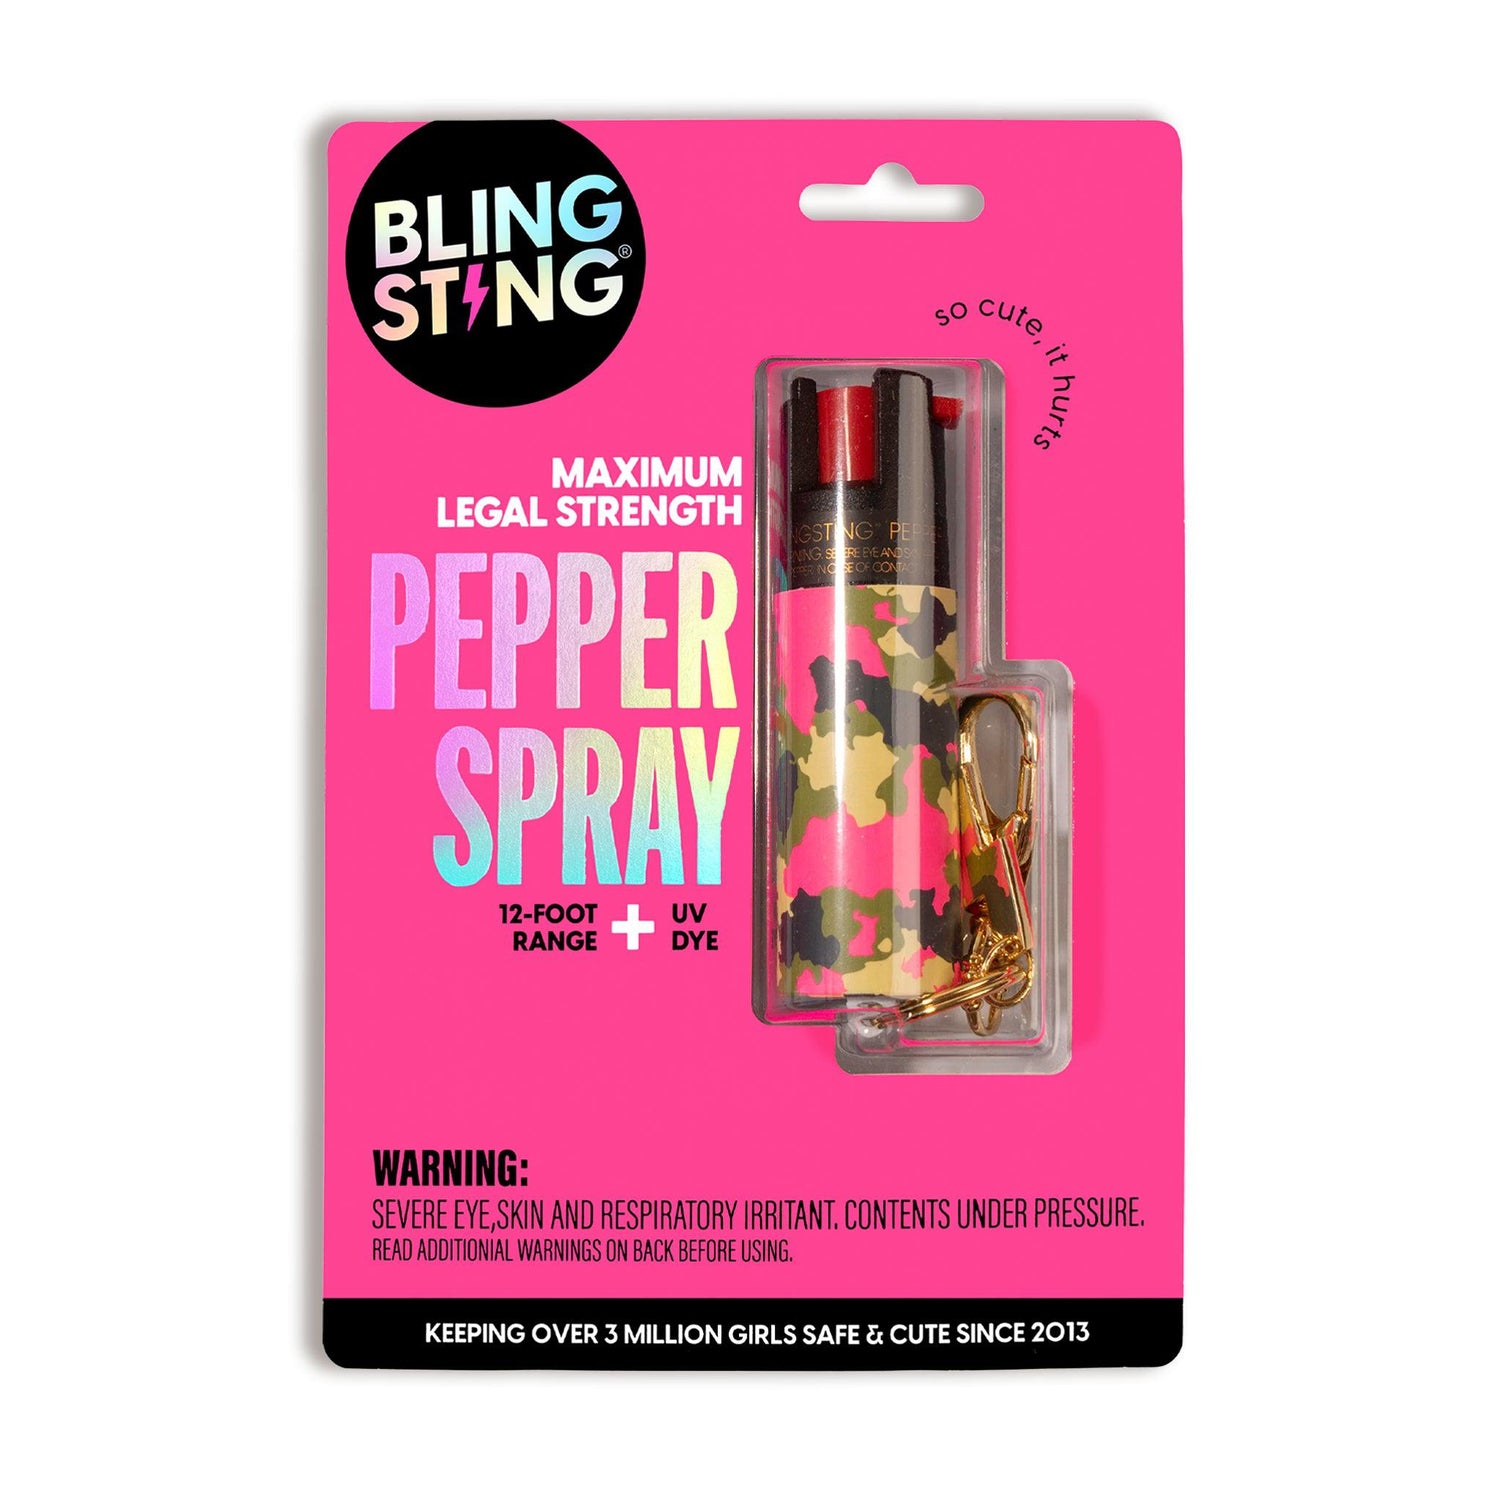 Camo Pepper Sprays - shop now on safety gear girls love to carry. Free gifts with purchase at blingsting.com